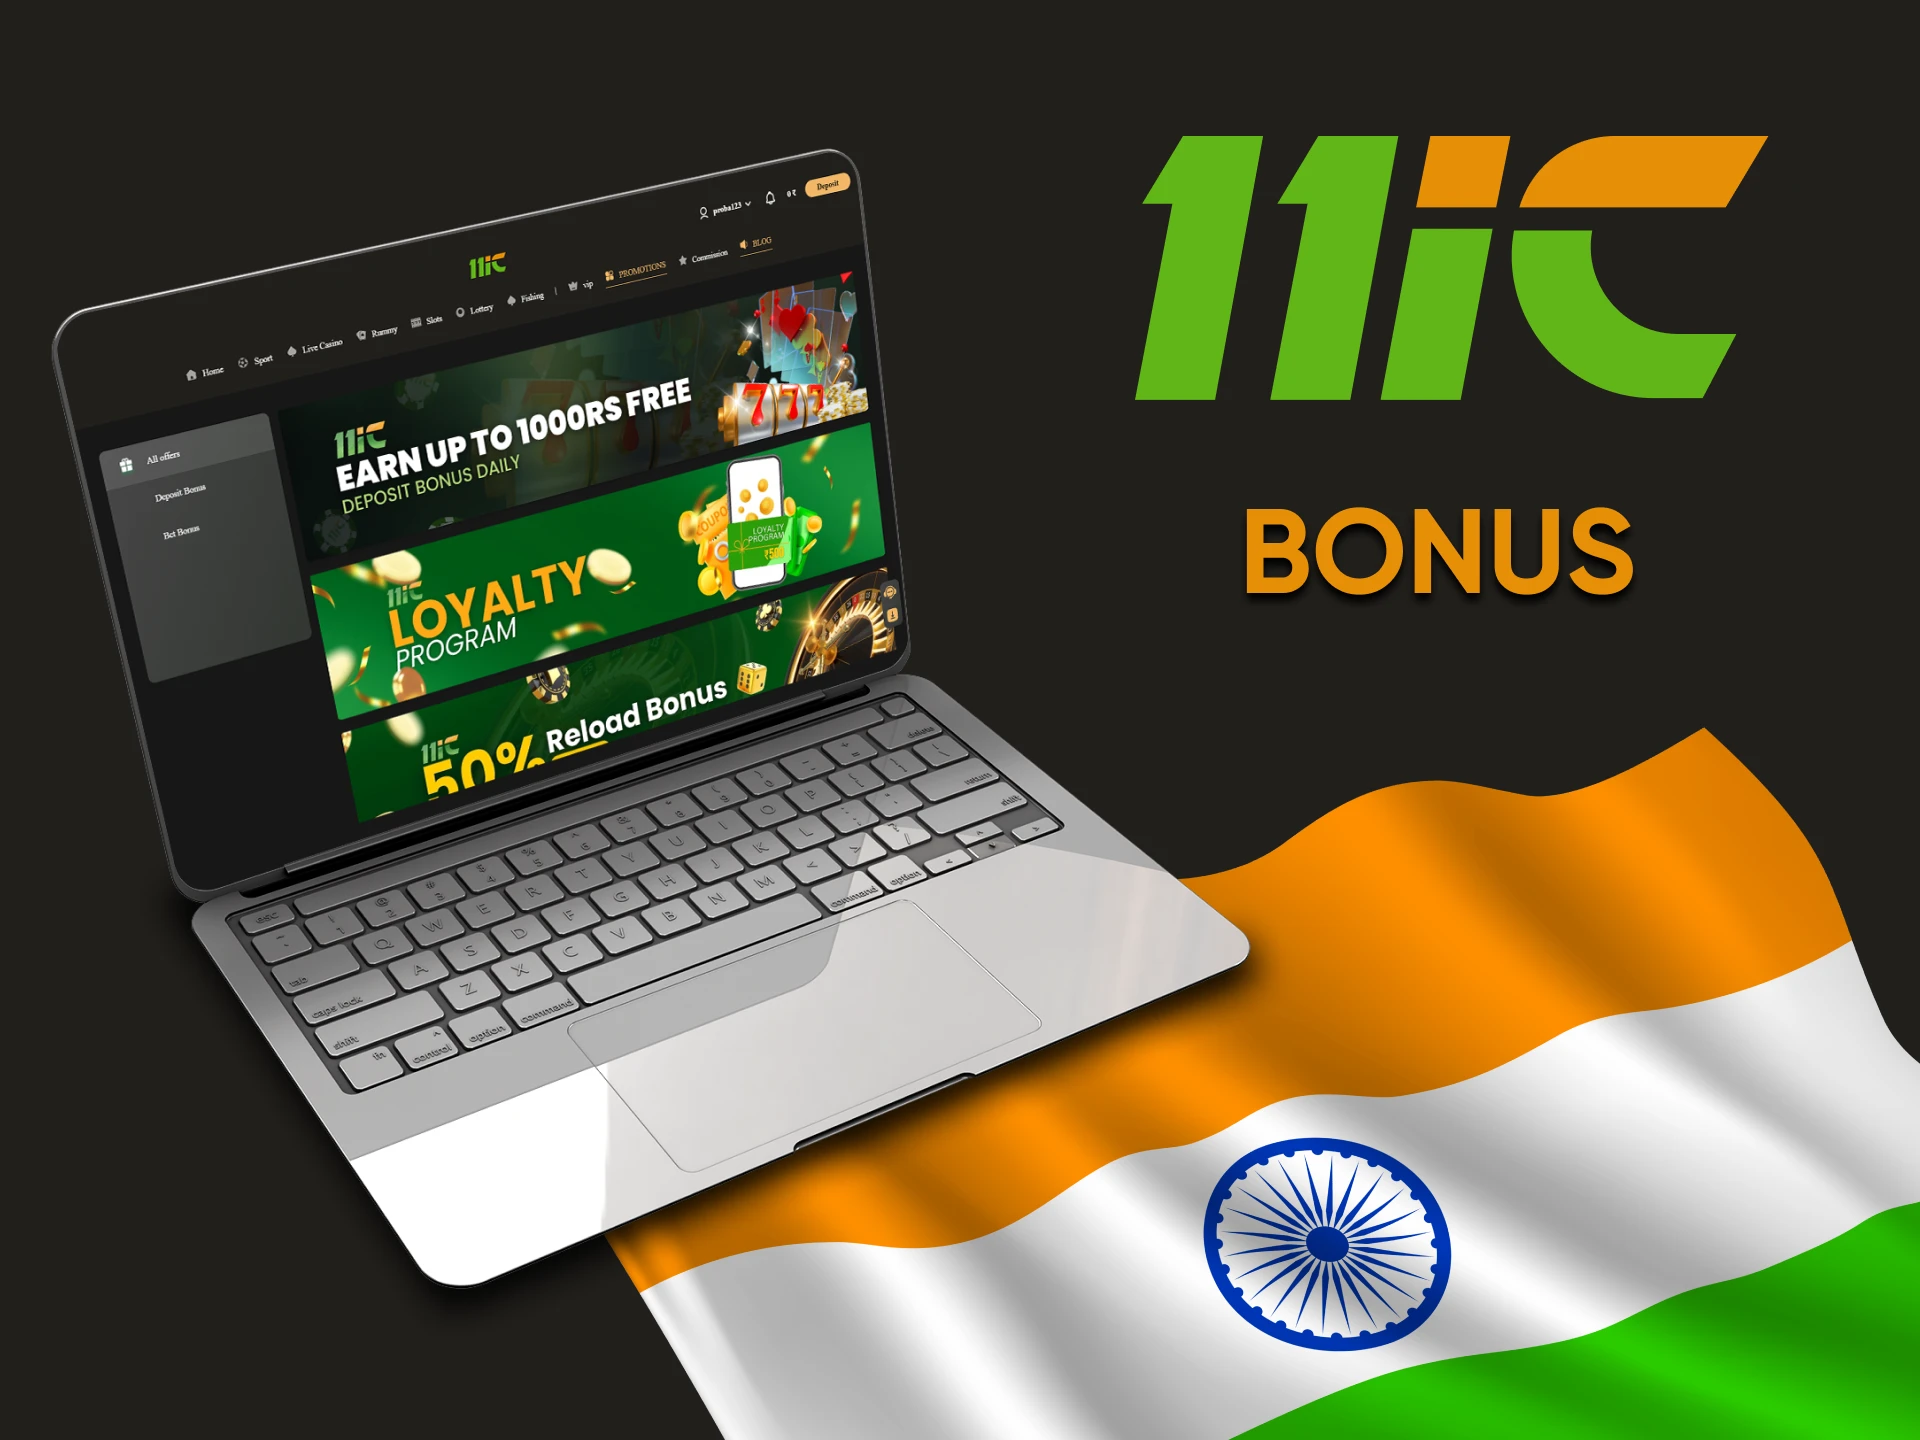 11ic gives bonuses to its users.